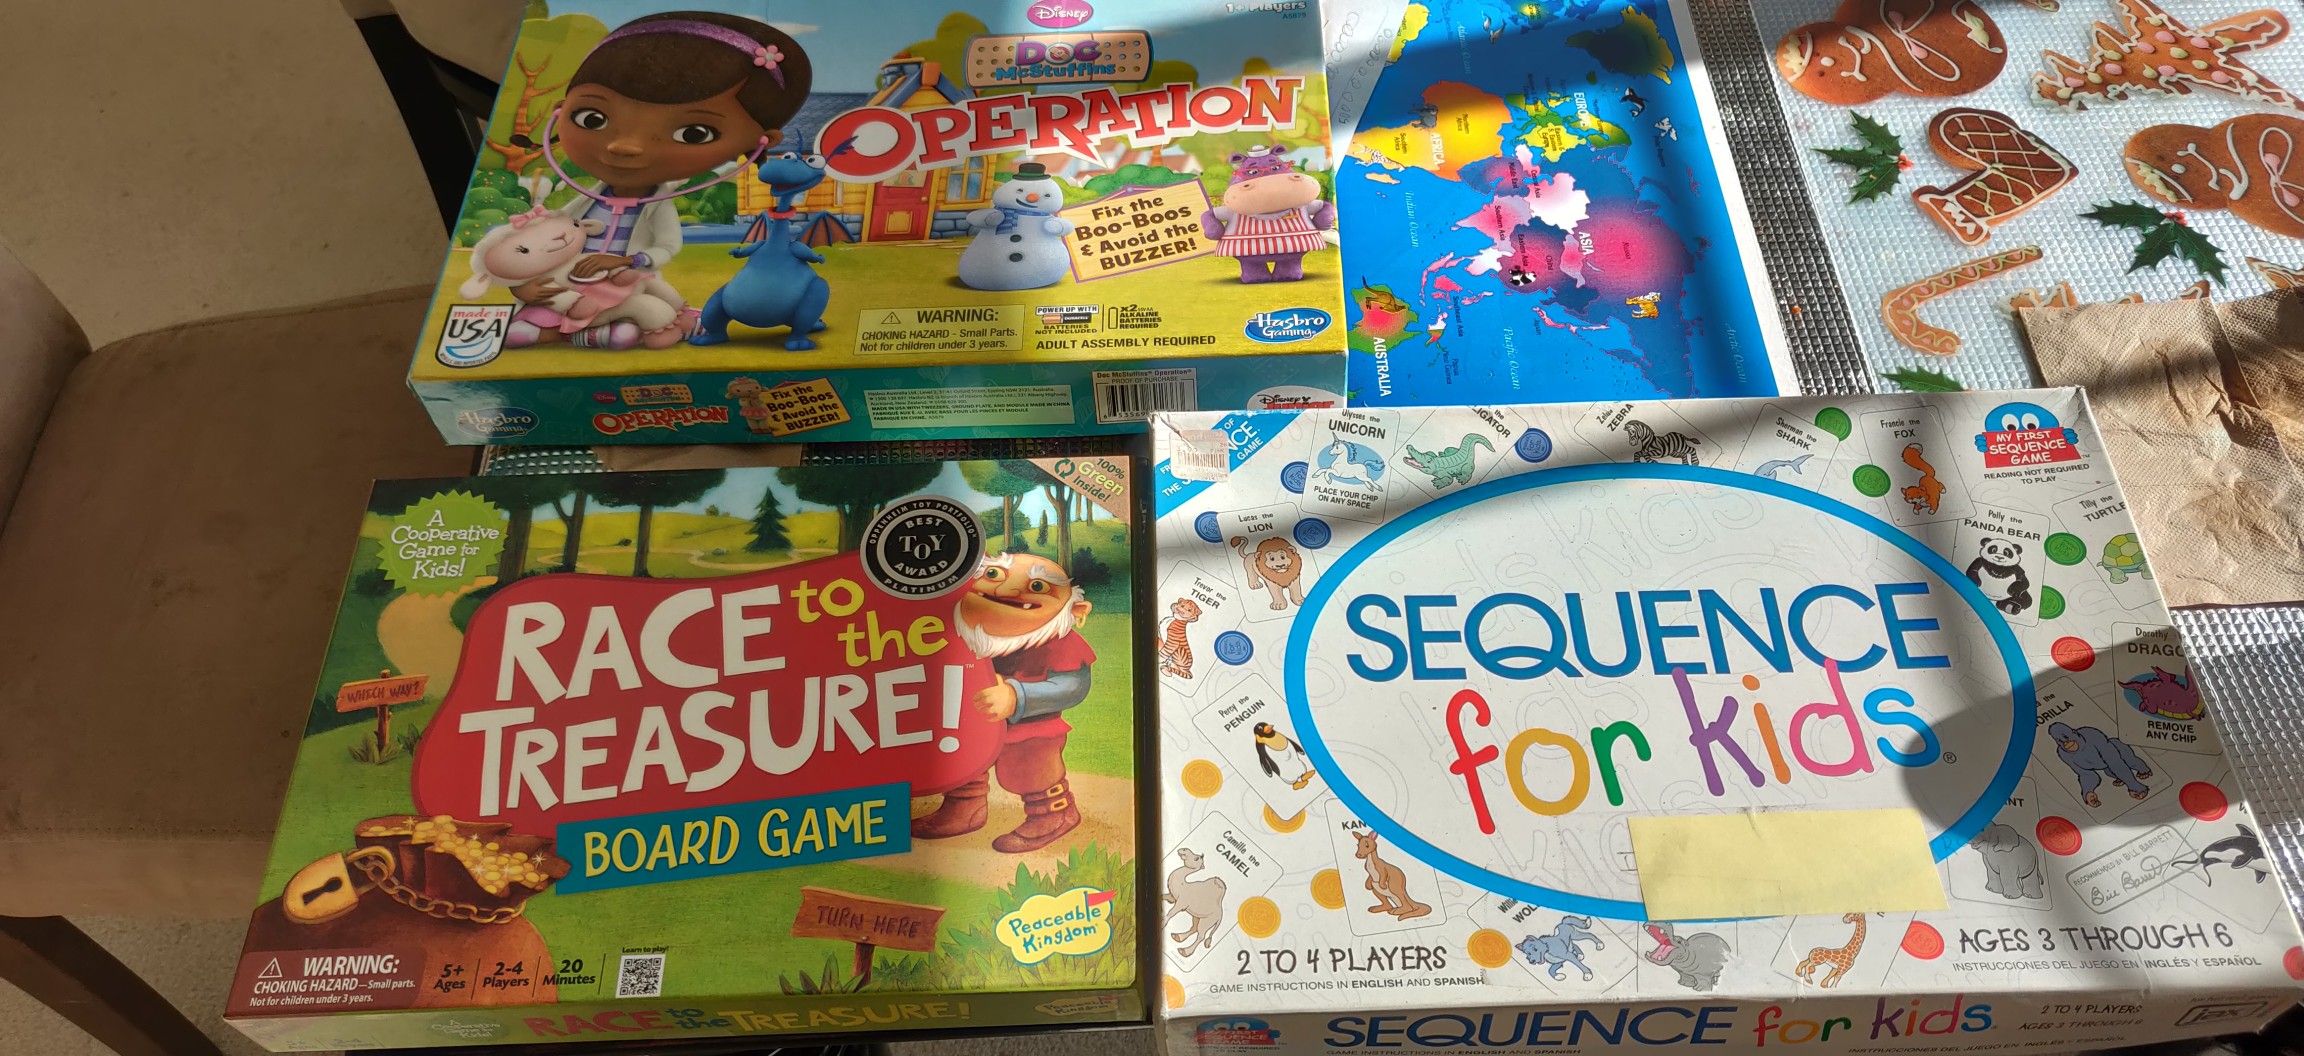 Board games! Race to the treasure - sequence for kids - 